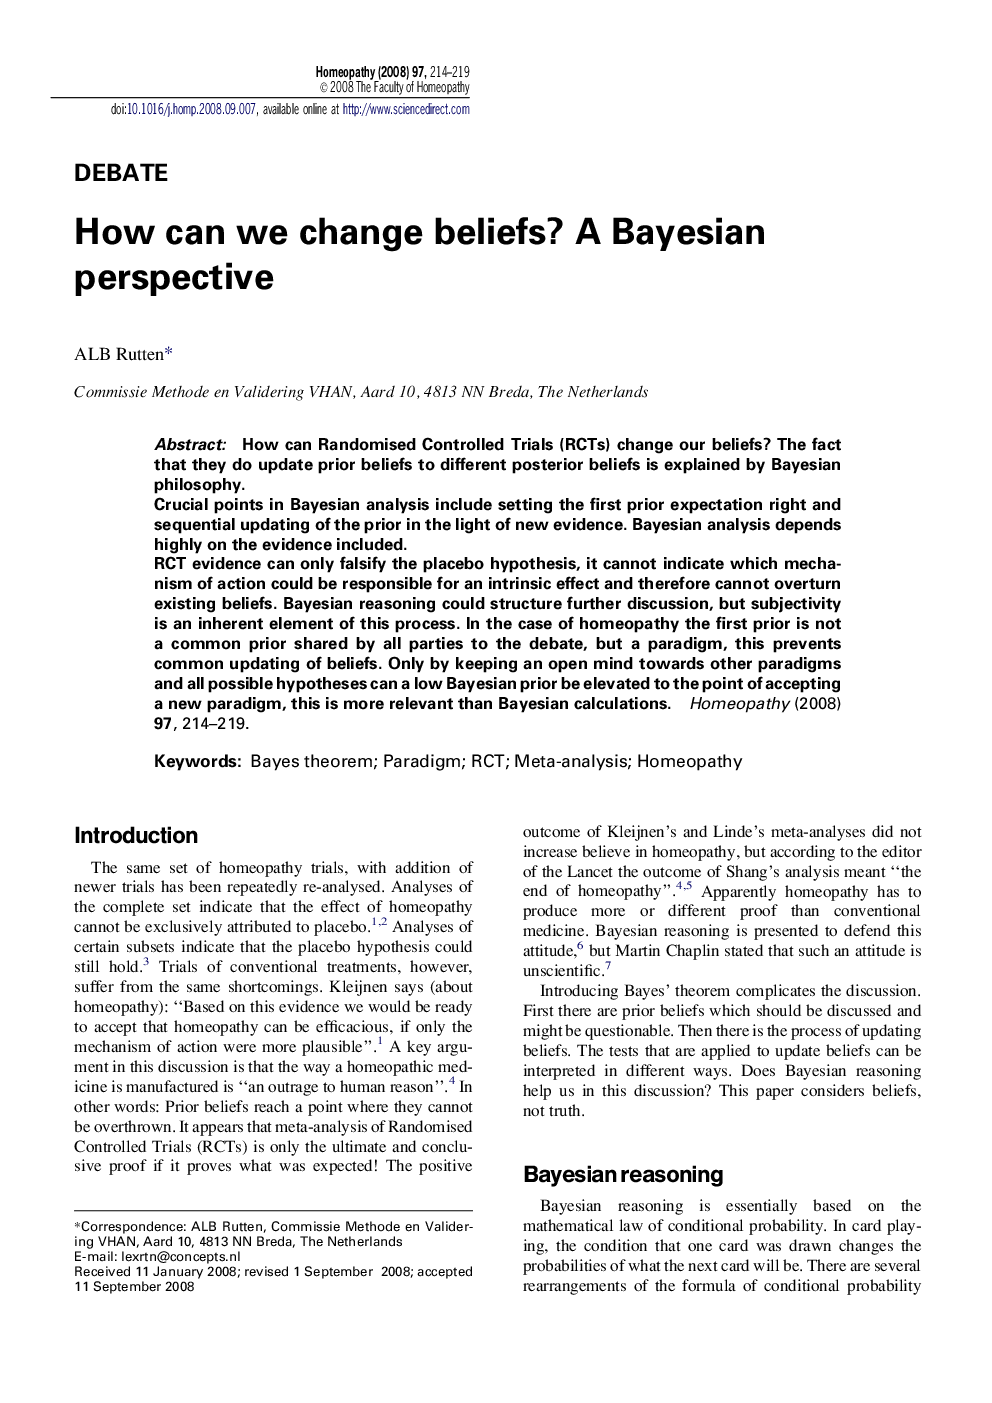 How can we change beliefs? A Bayesian perspective